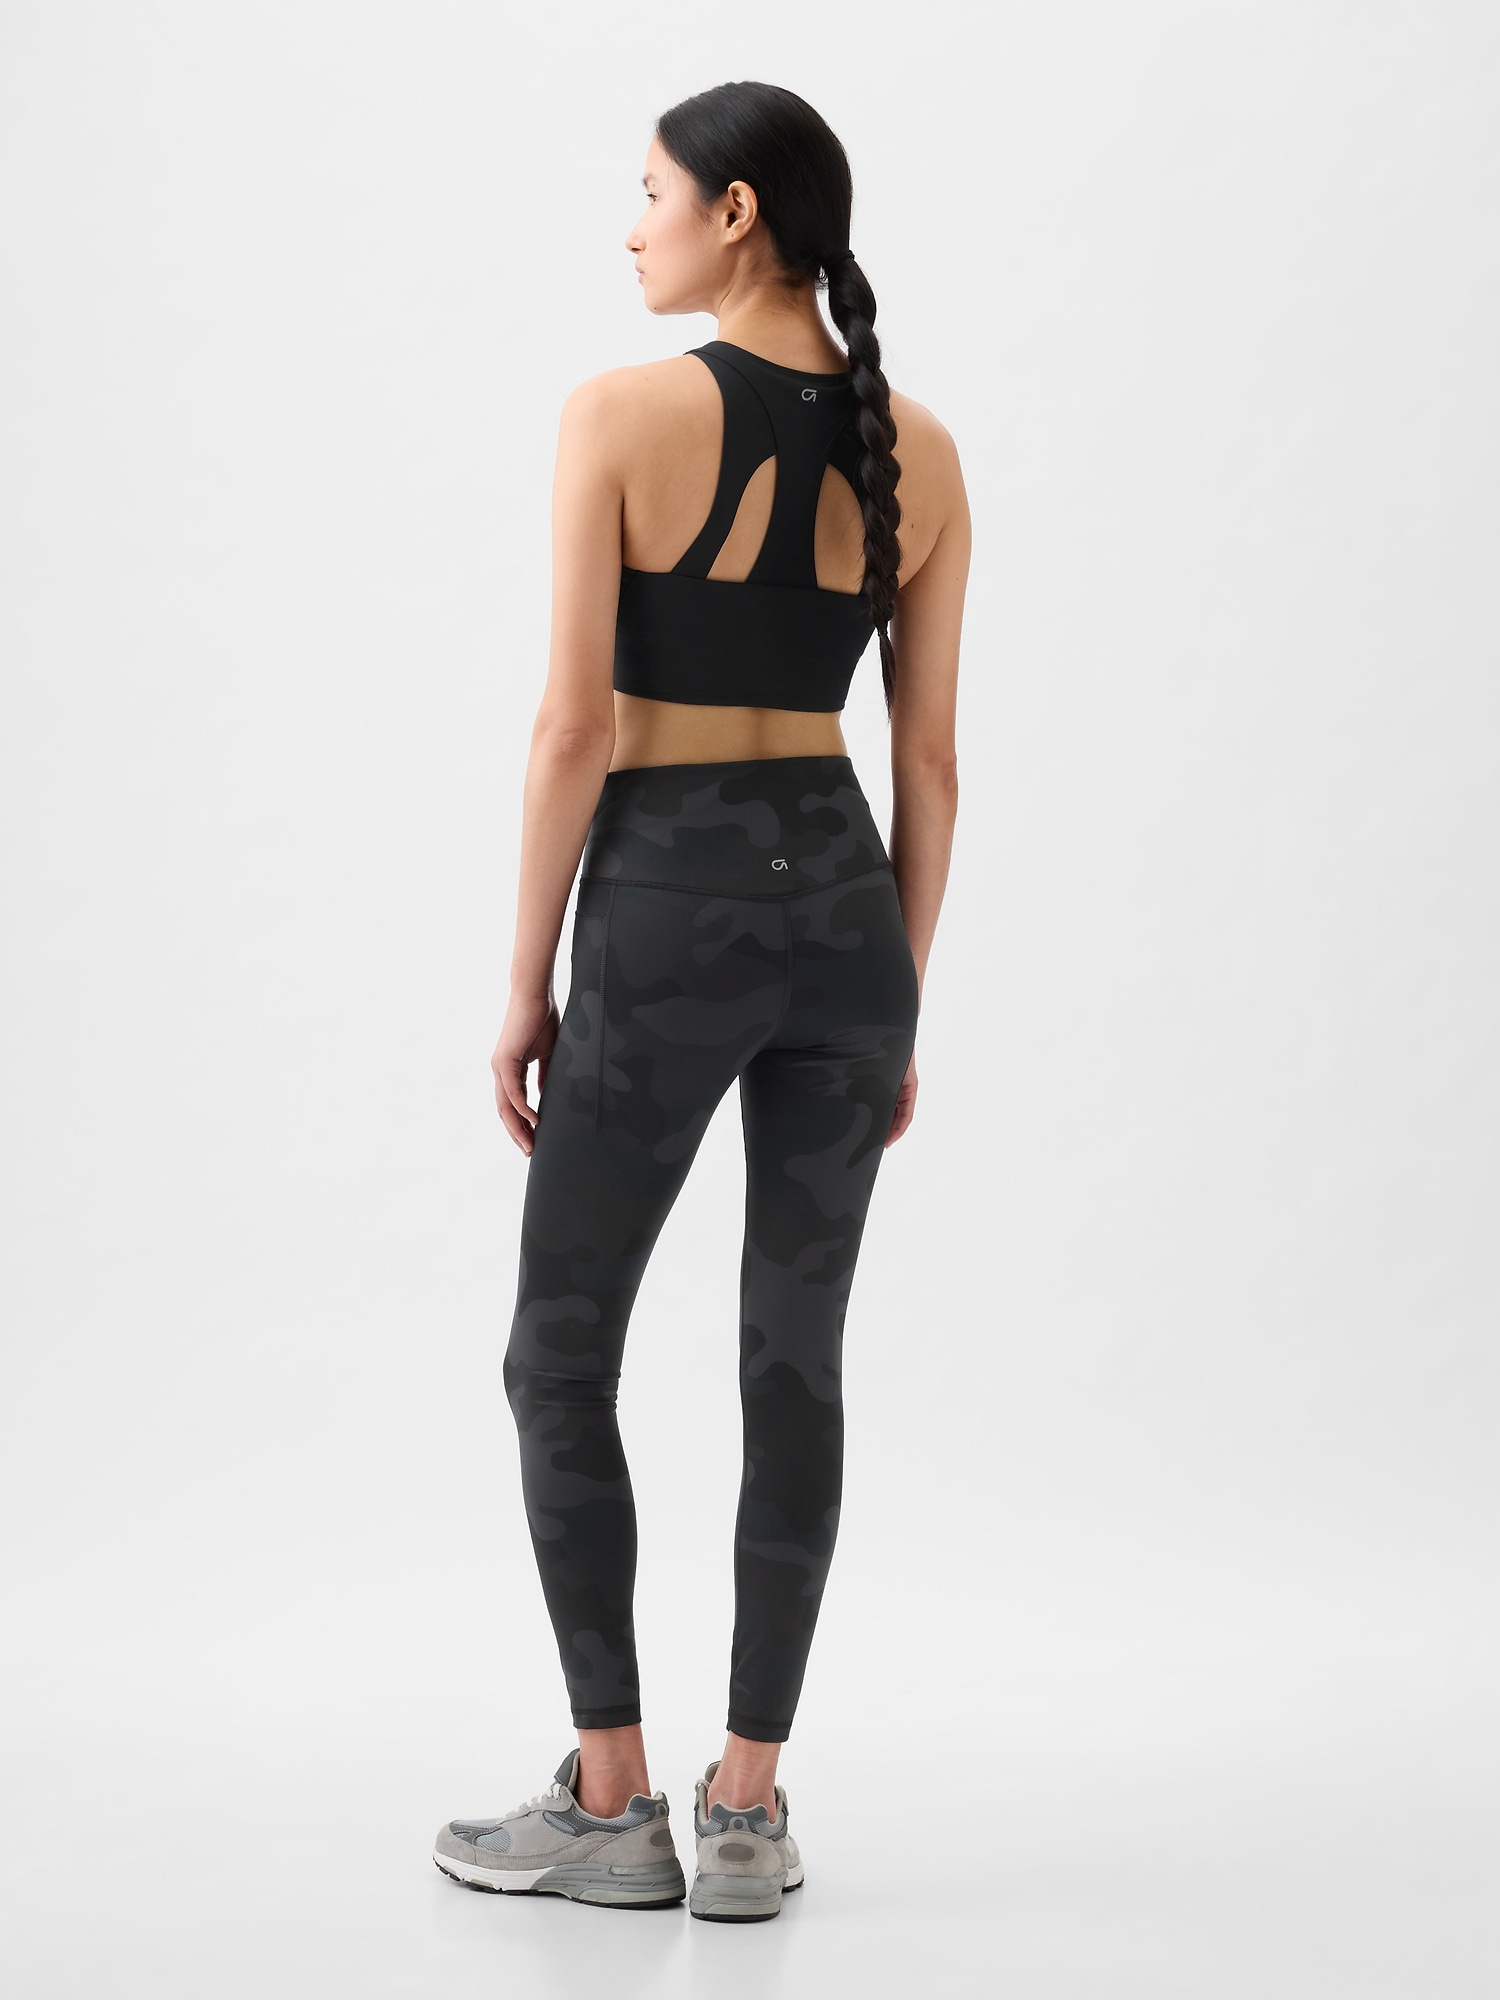 Buy Gap High Waisted Power Compression 7/8 Leggings from the Gap online shop